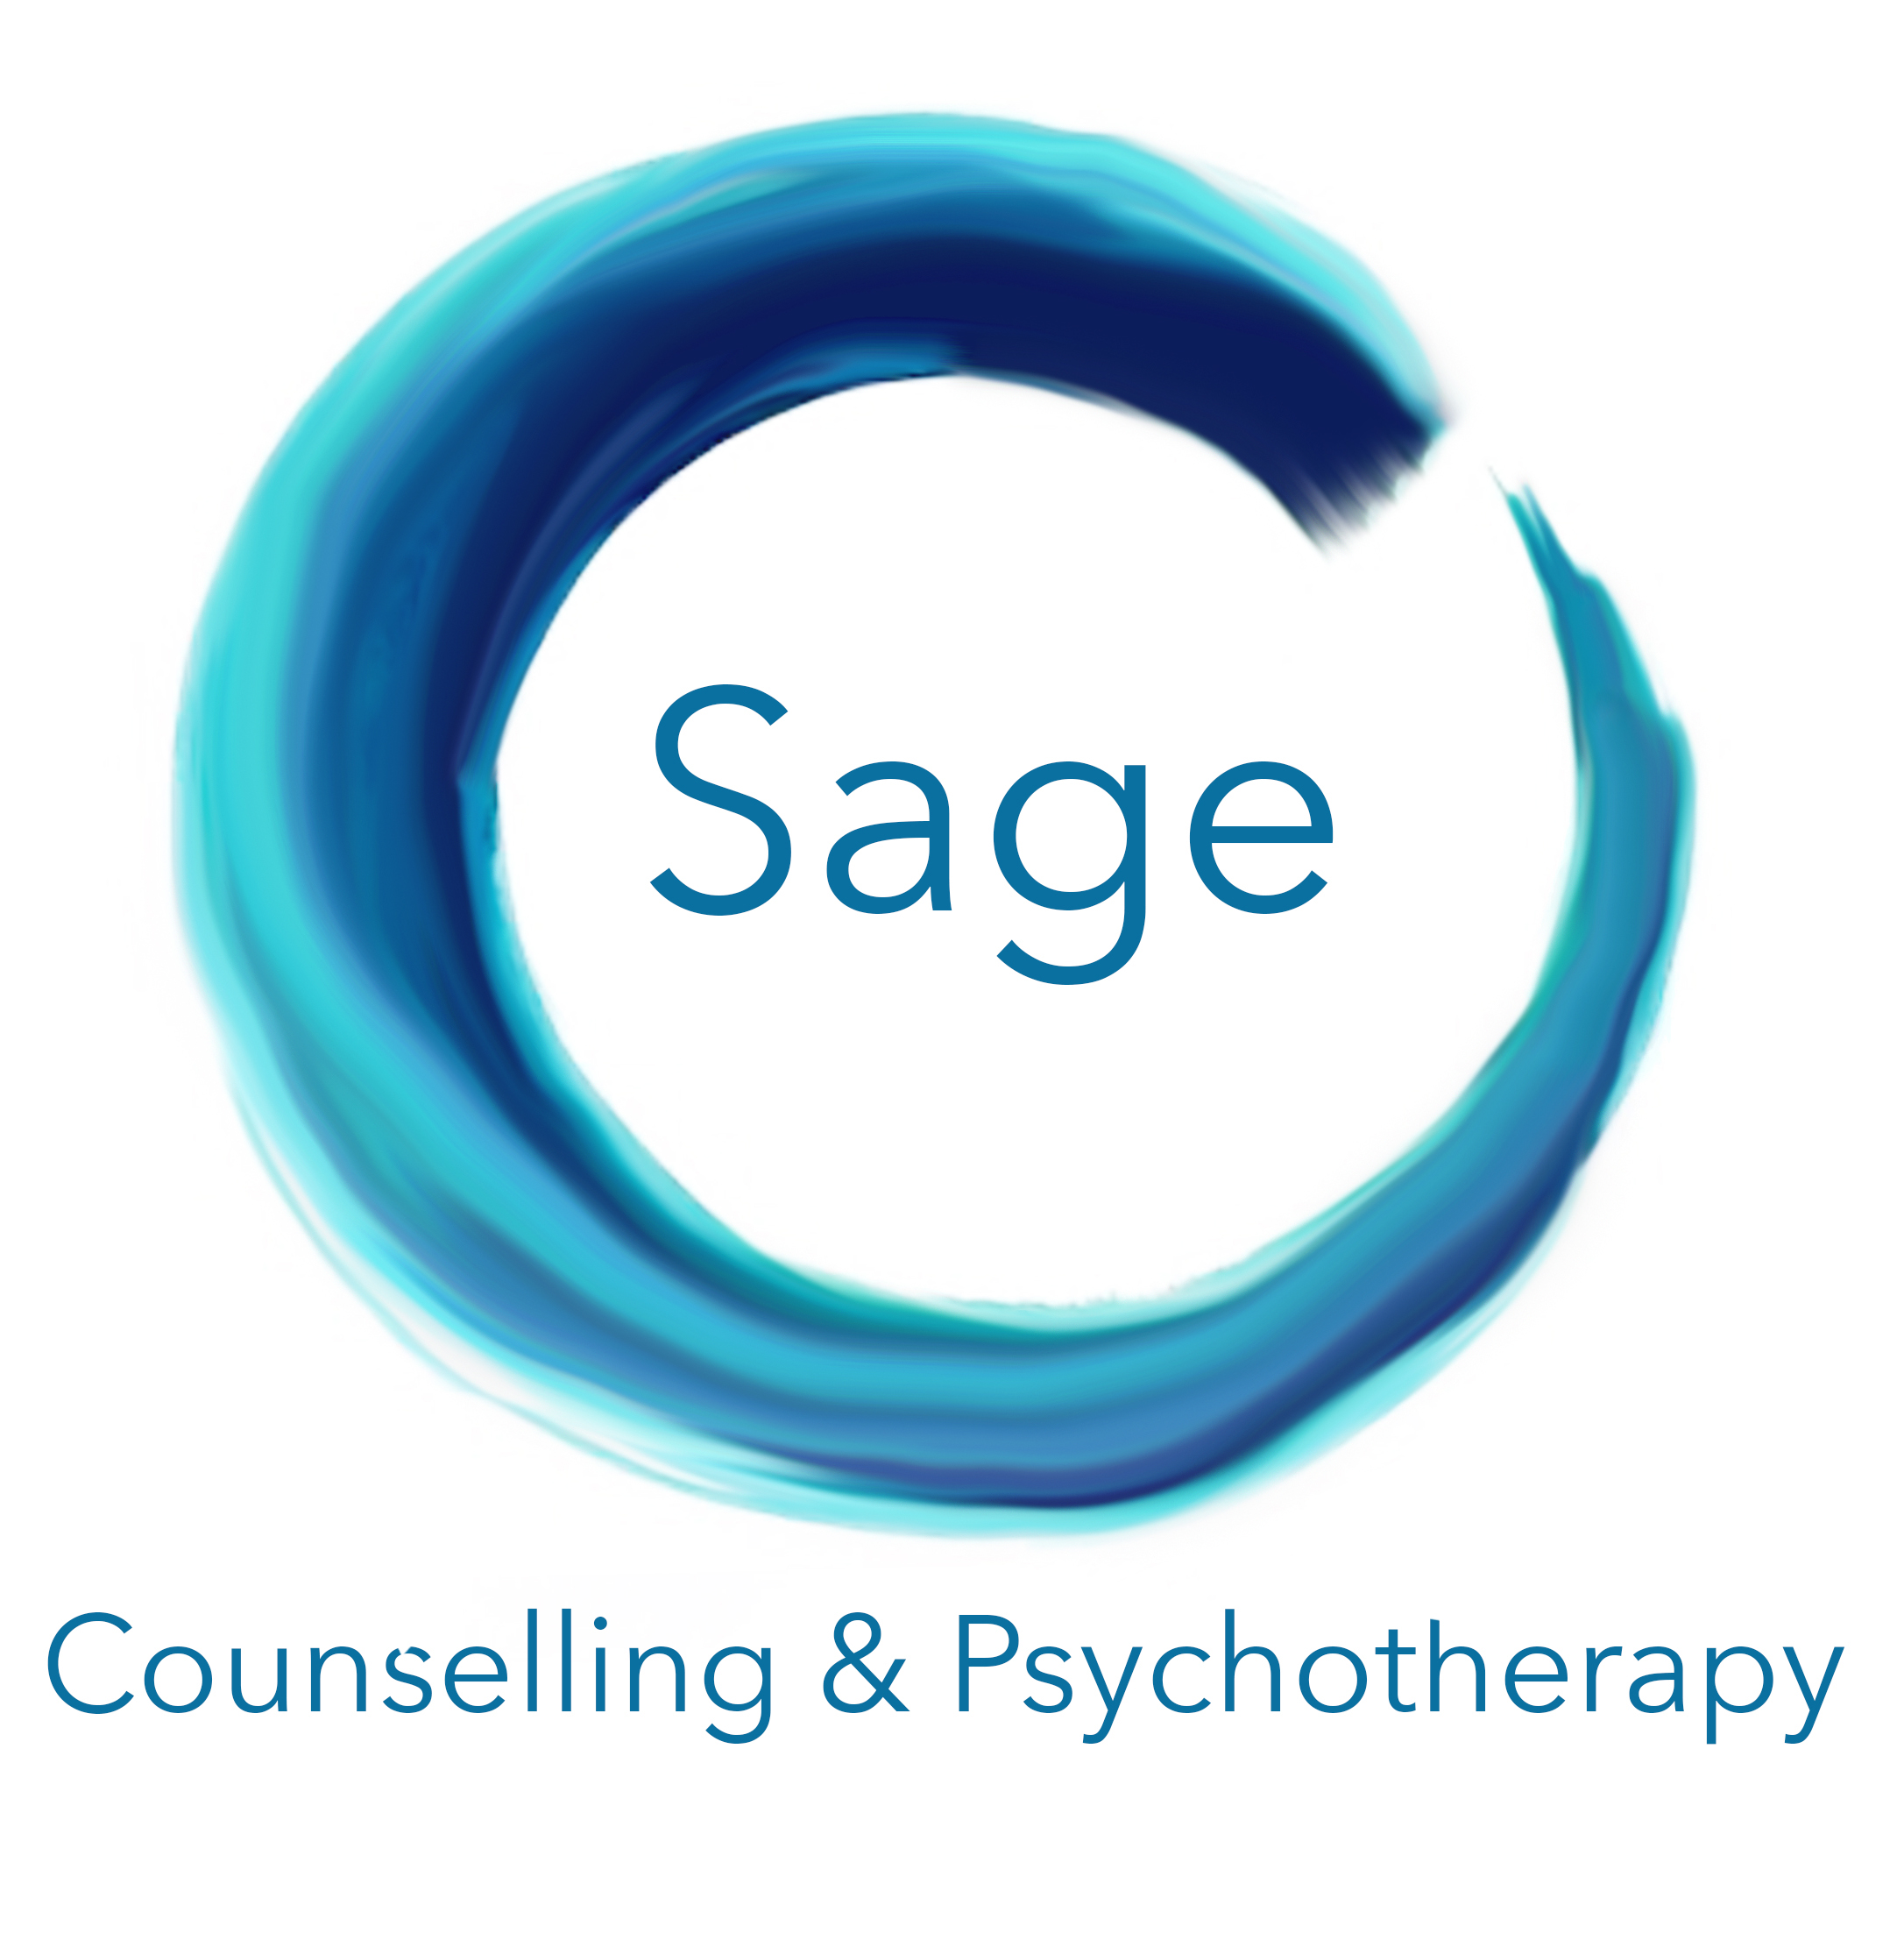 Sage Counselling & Psychotherapy